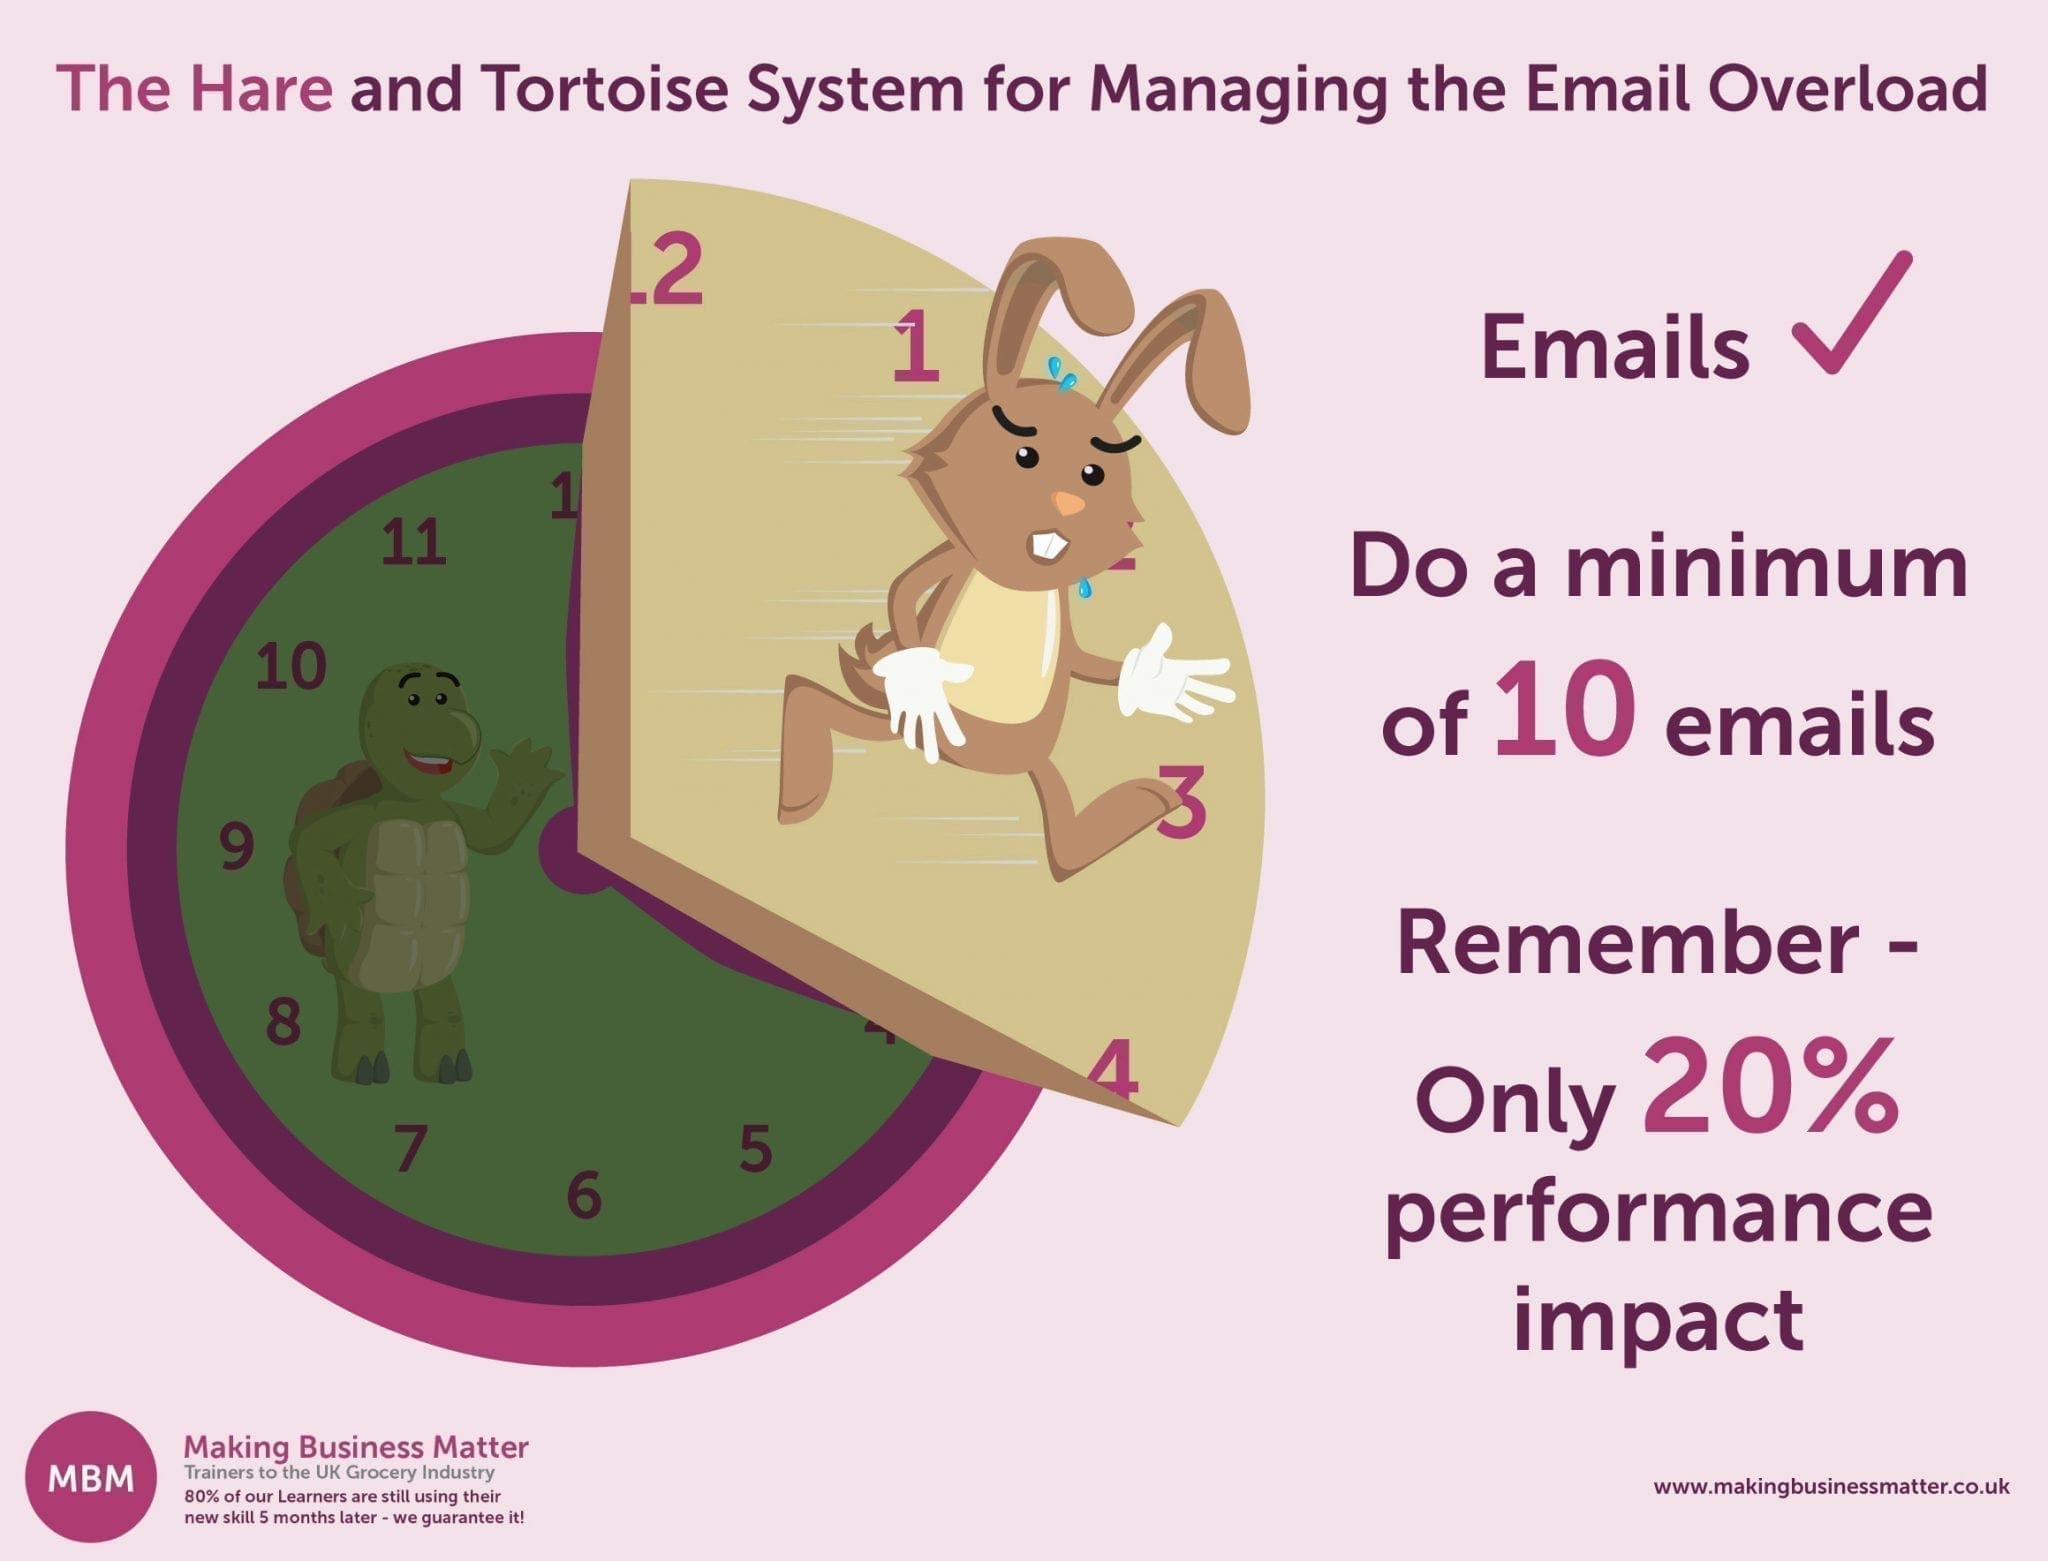 An infographic of "The Hare and Tortoise System for Managing the Email Overload"